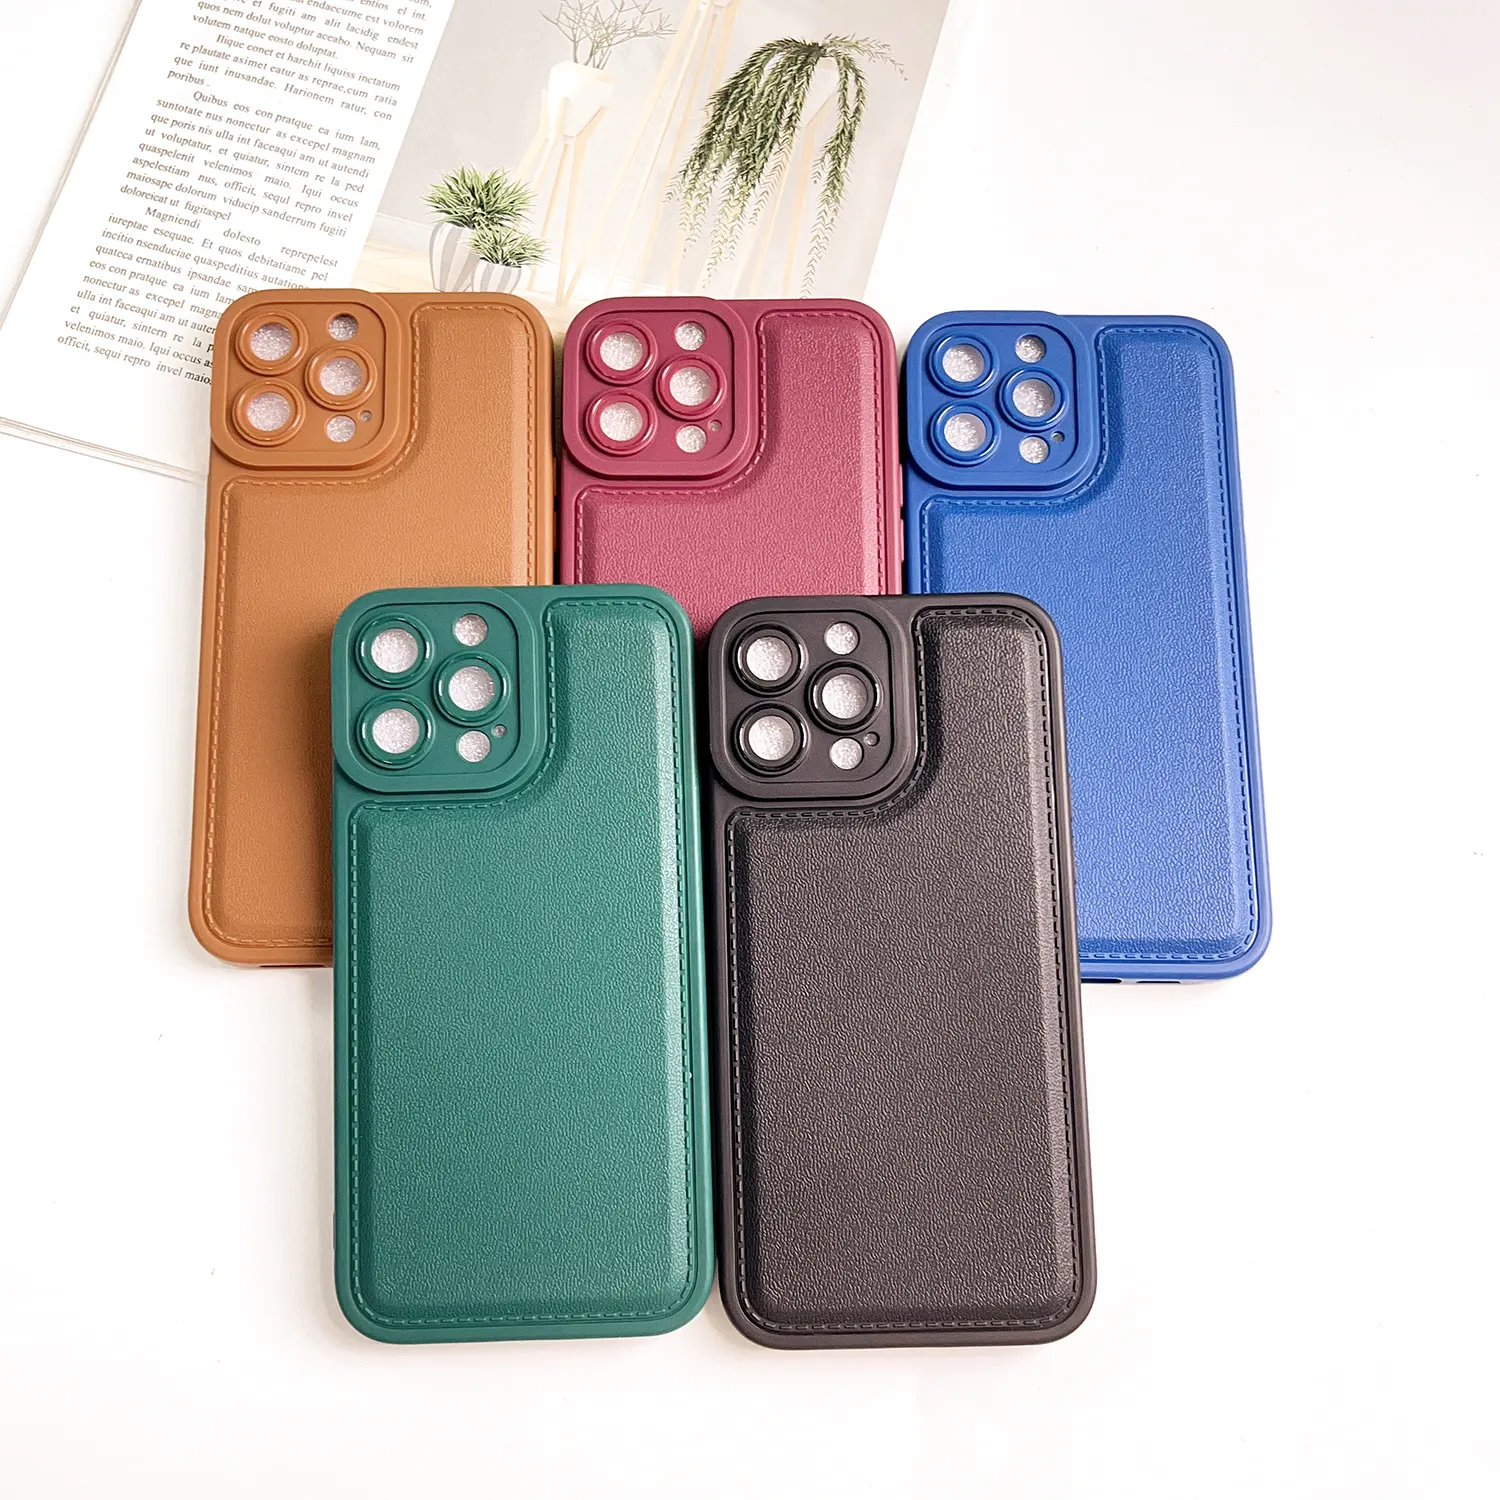 Business new arrival High quality Leather pattern TPU phone case for iPhone 14/14 Pro max/14 plus cover